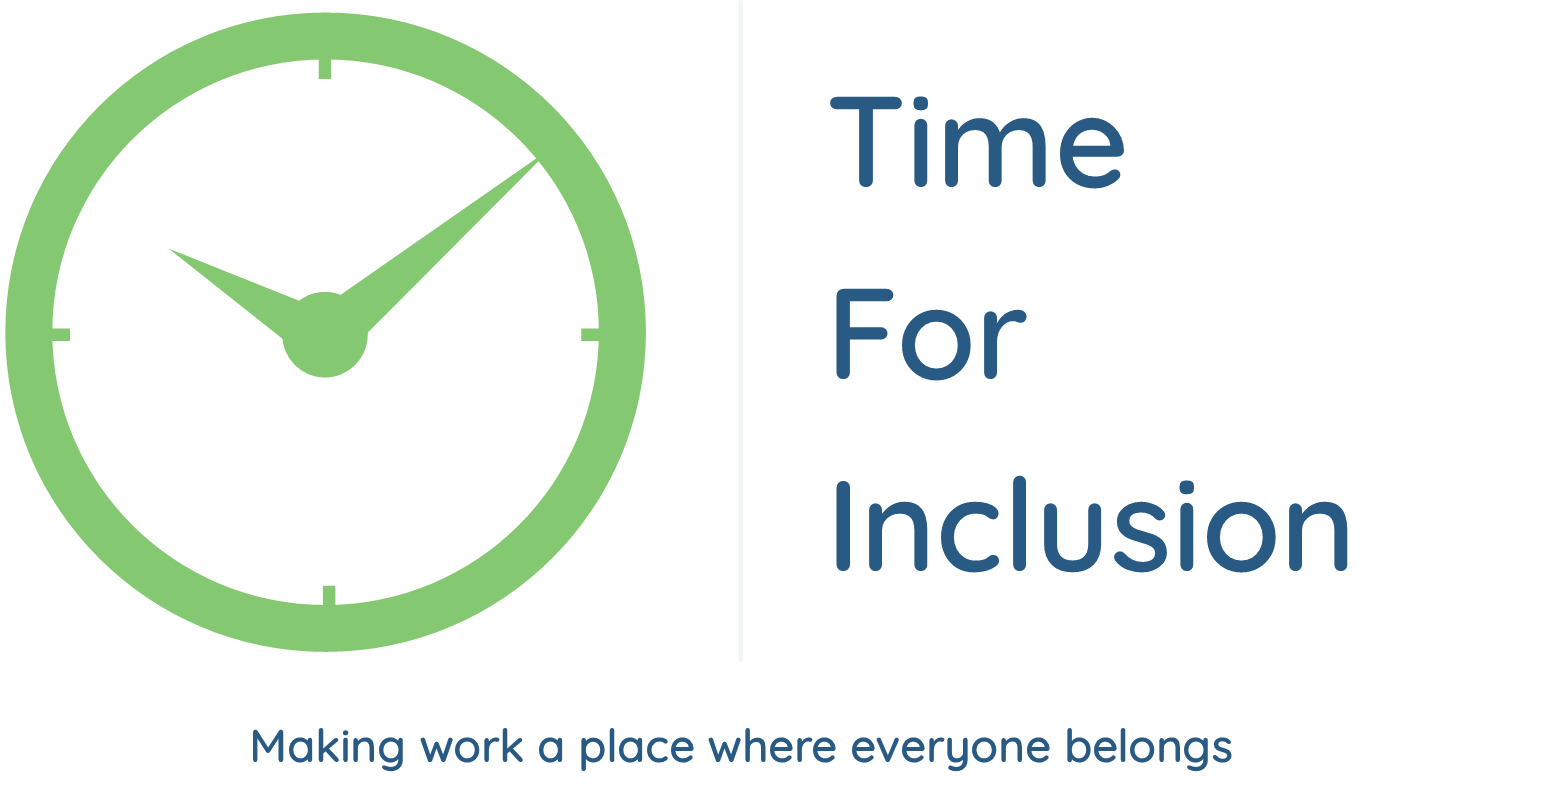 Time for Inclusion. Making work a place where everyone belongs